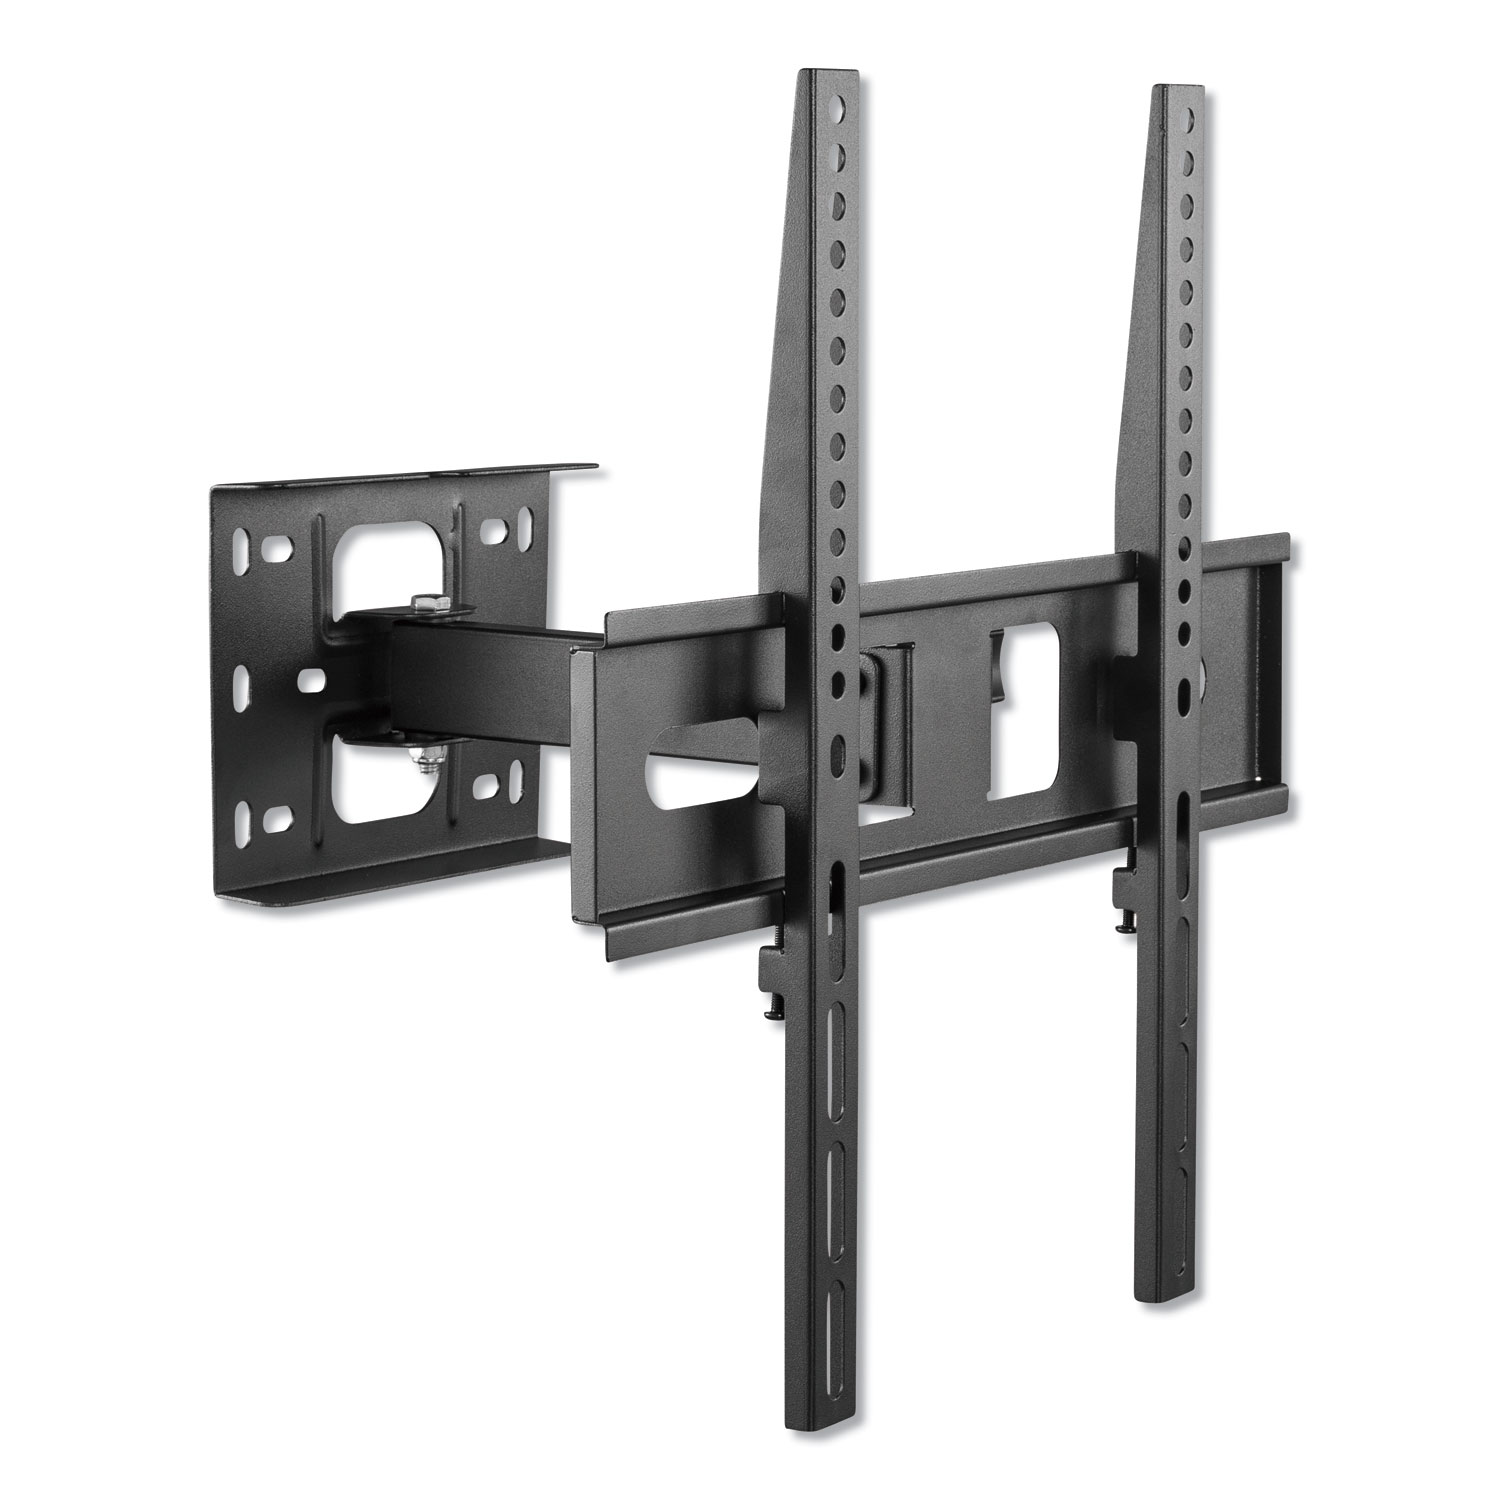 Full-Motion TV Wall Mount for Monitors 32" to 55", 0.75w x ...